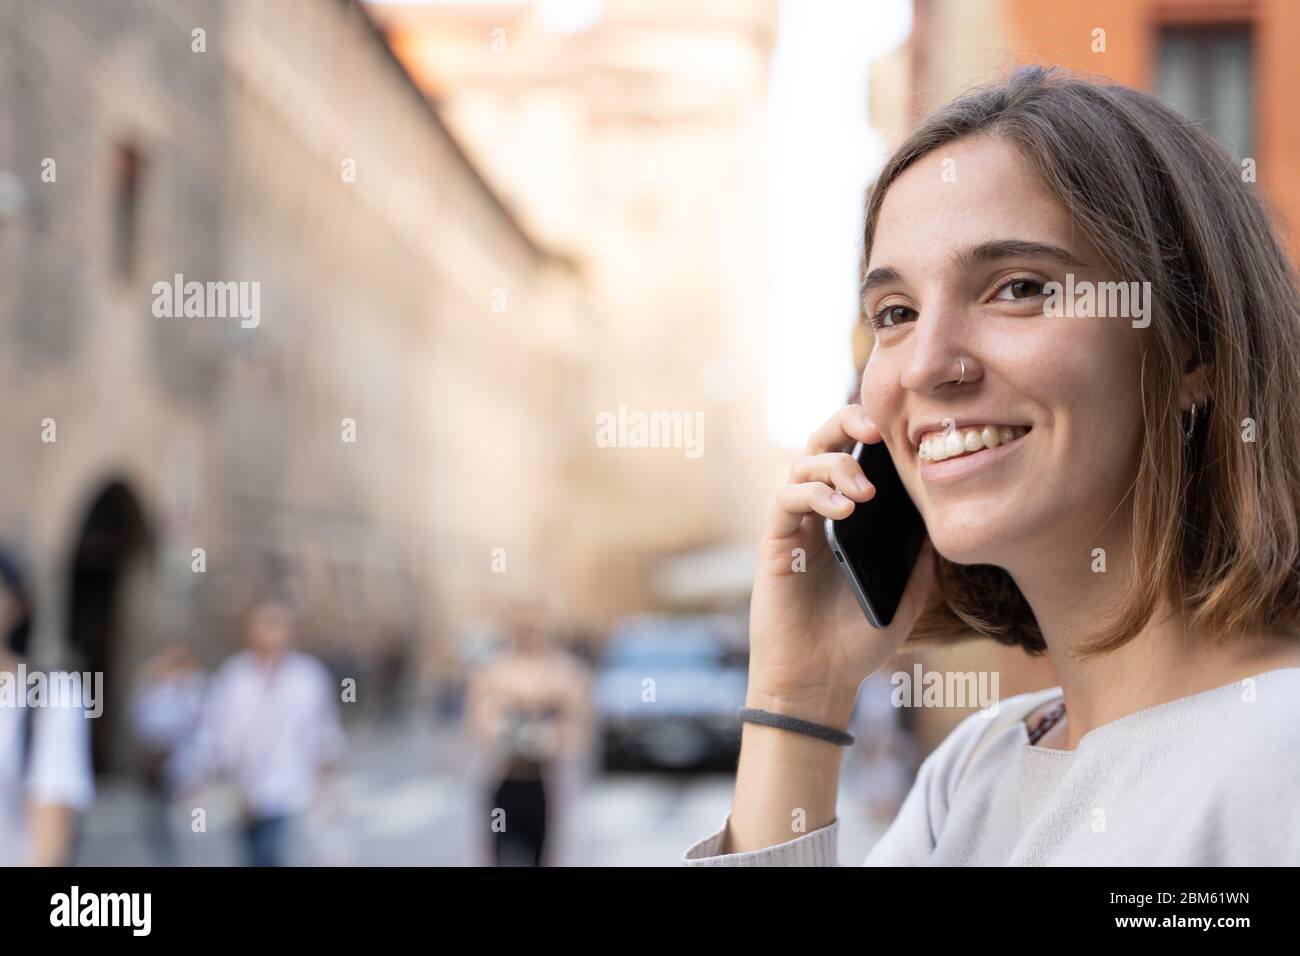 Young woman with half a mane and a pierced nose smiling and talking to her cell phone on the street Stock Photo